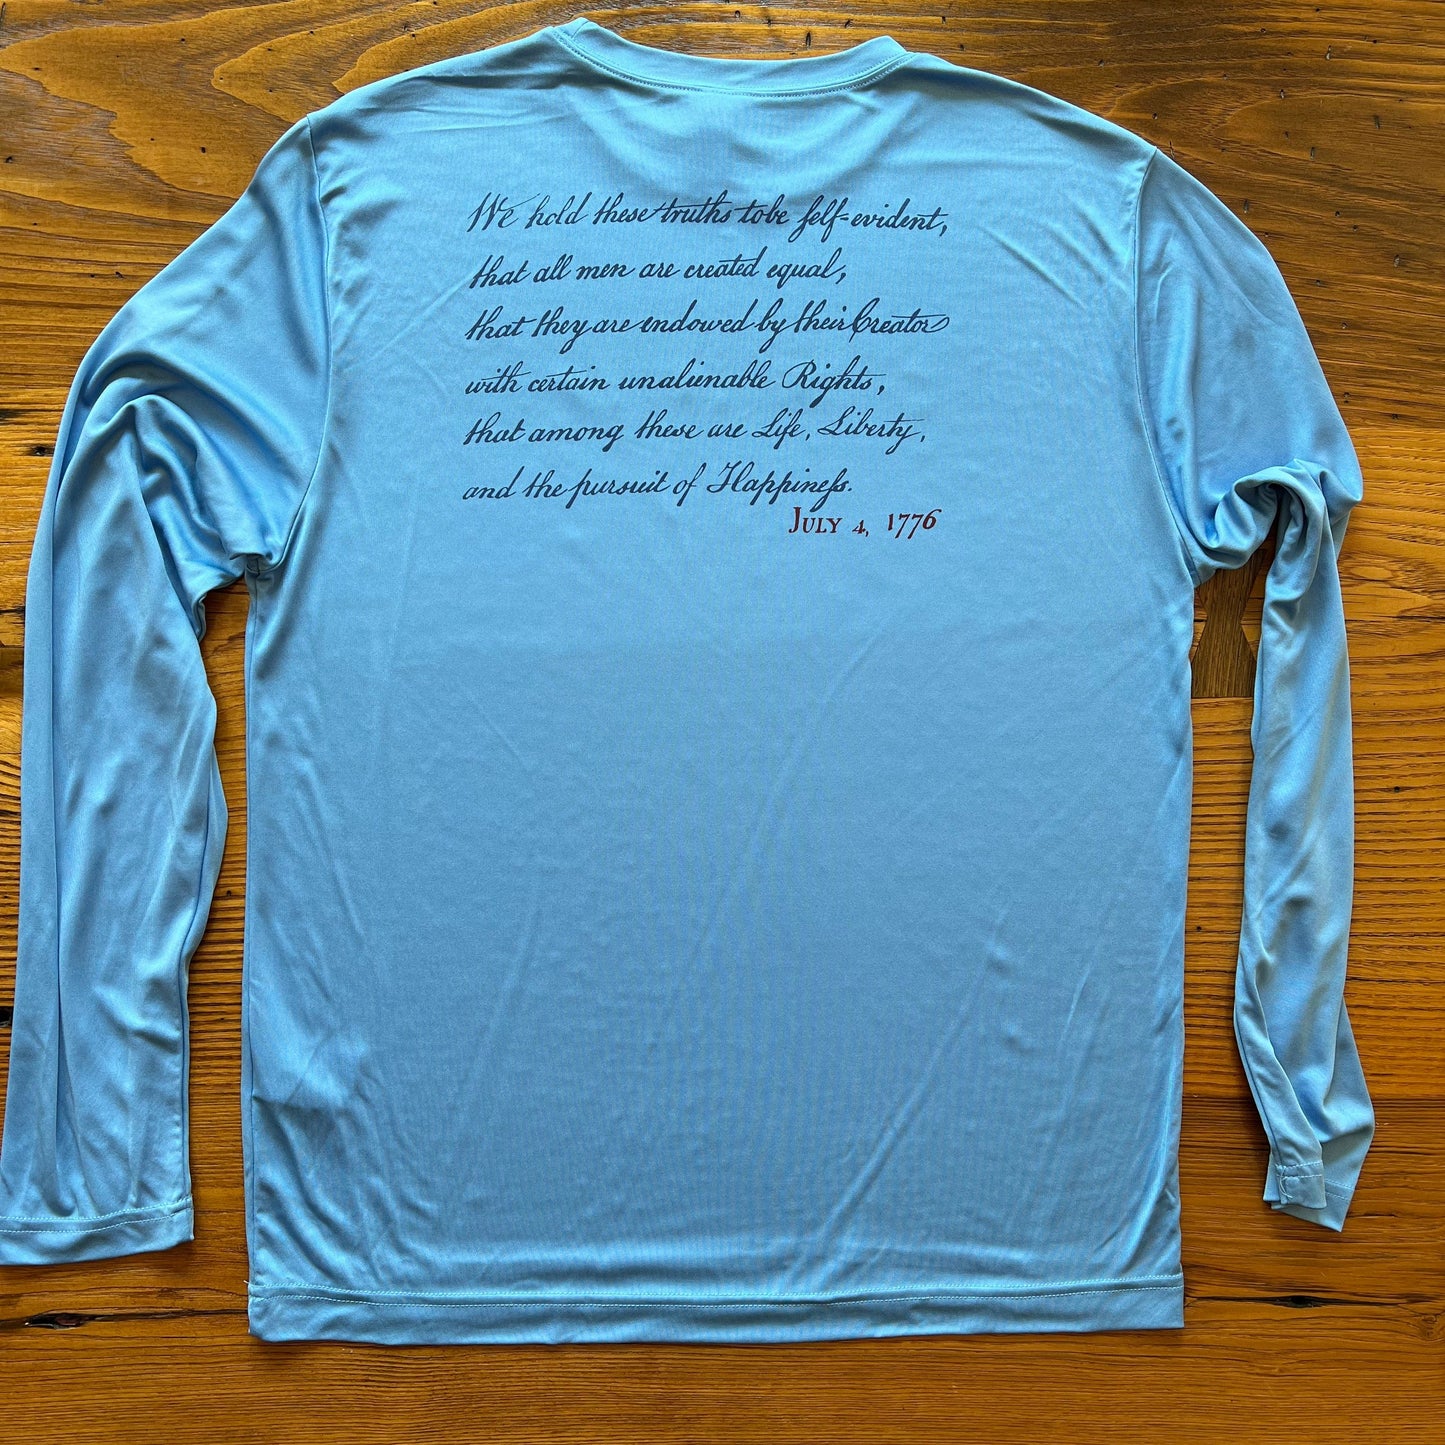 Back of "We hold these truths - July 4, 1776” on moisture-wicking 100% polyester interlock with SPF 40+ UV protection - Long-sleeved from The History List store